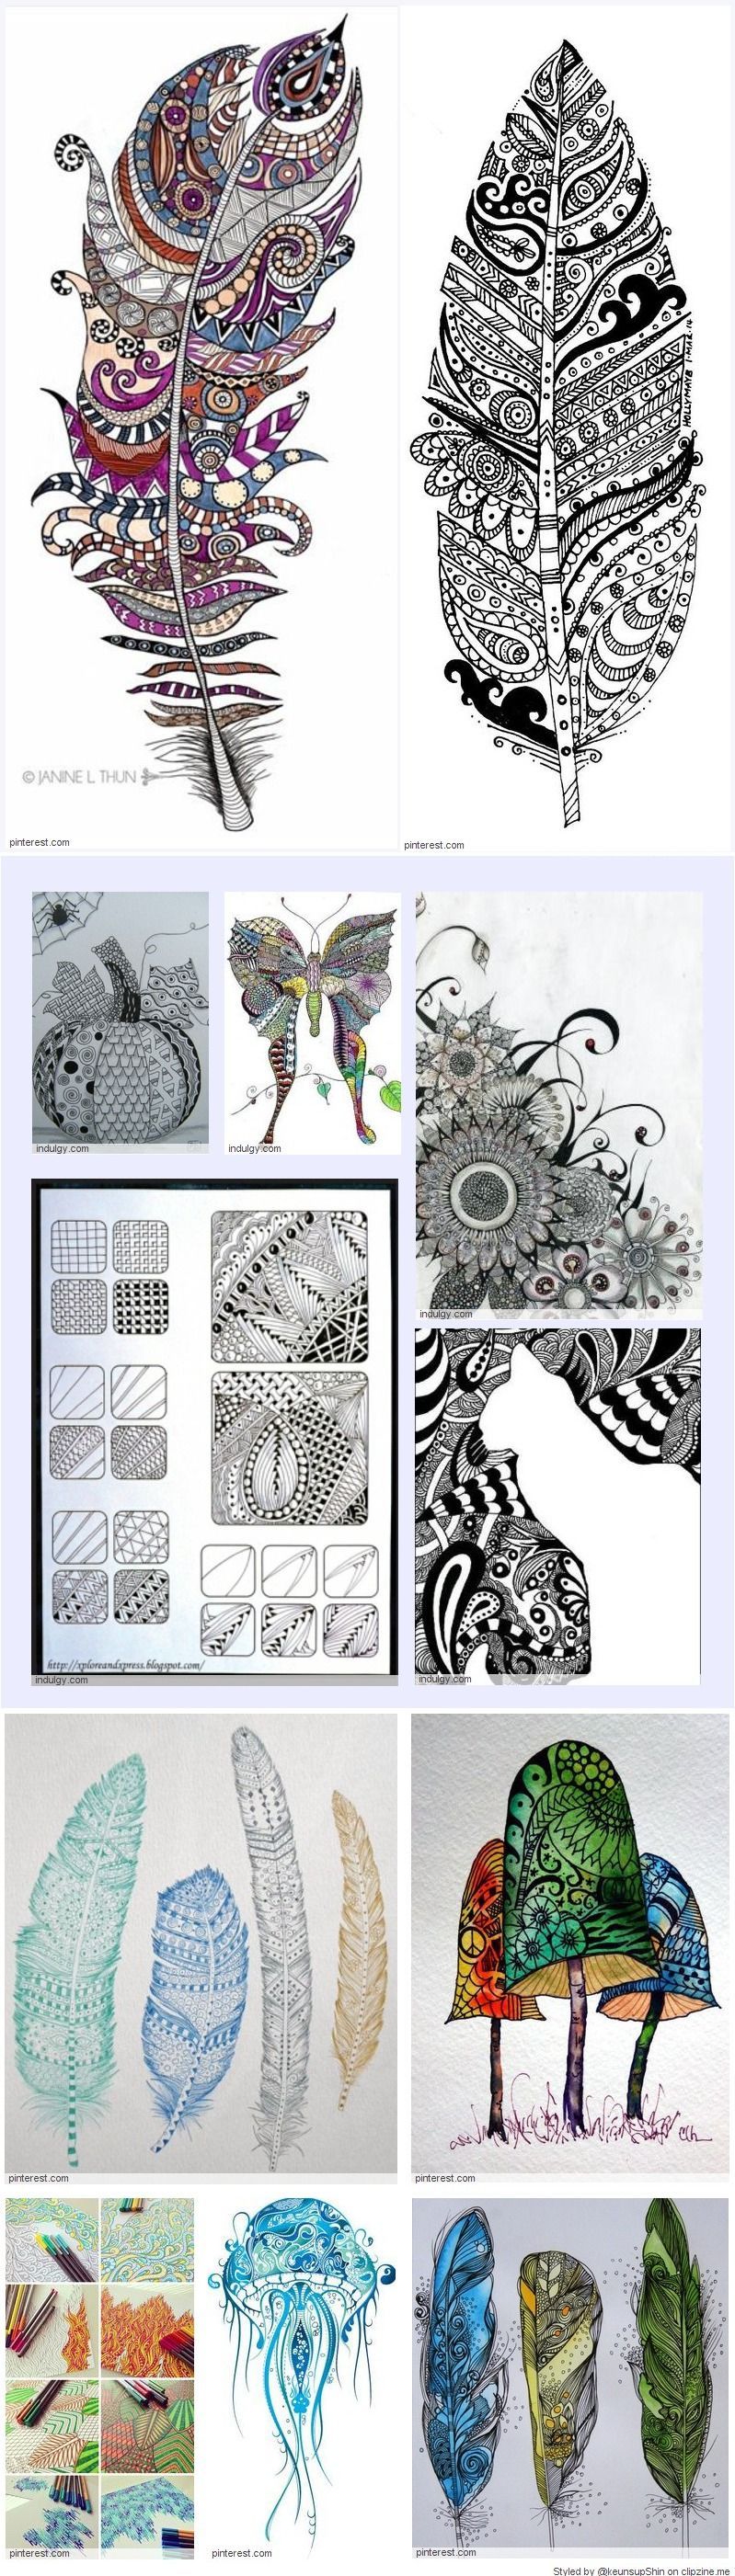 Zentangle Patterns. Art comes in all shapes and forms, be careful to not fit art in just one catorgary.